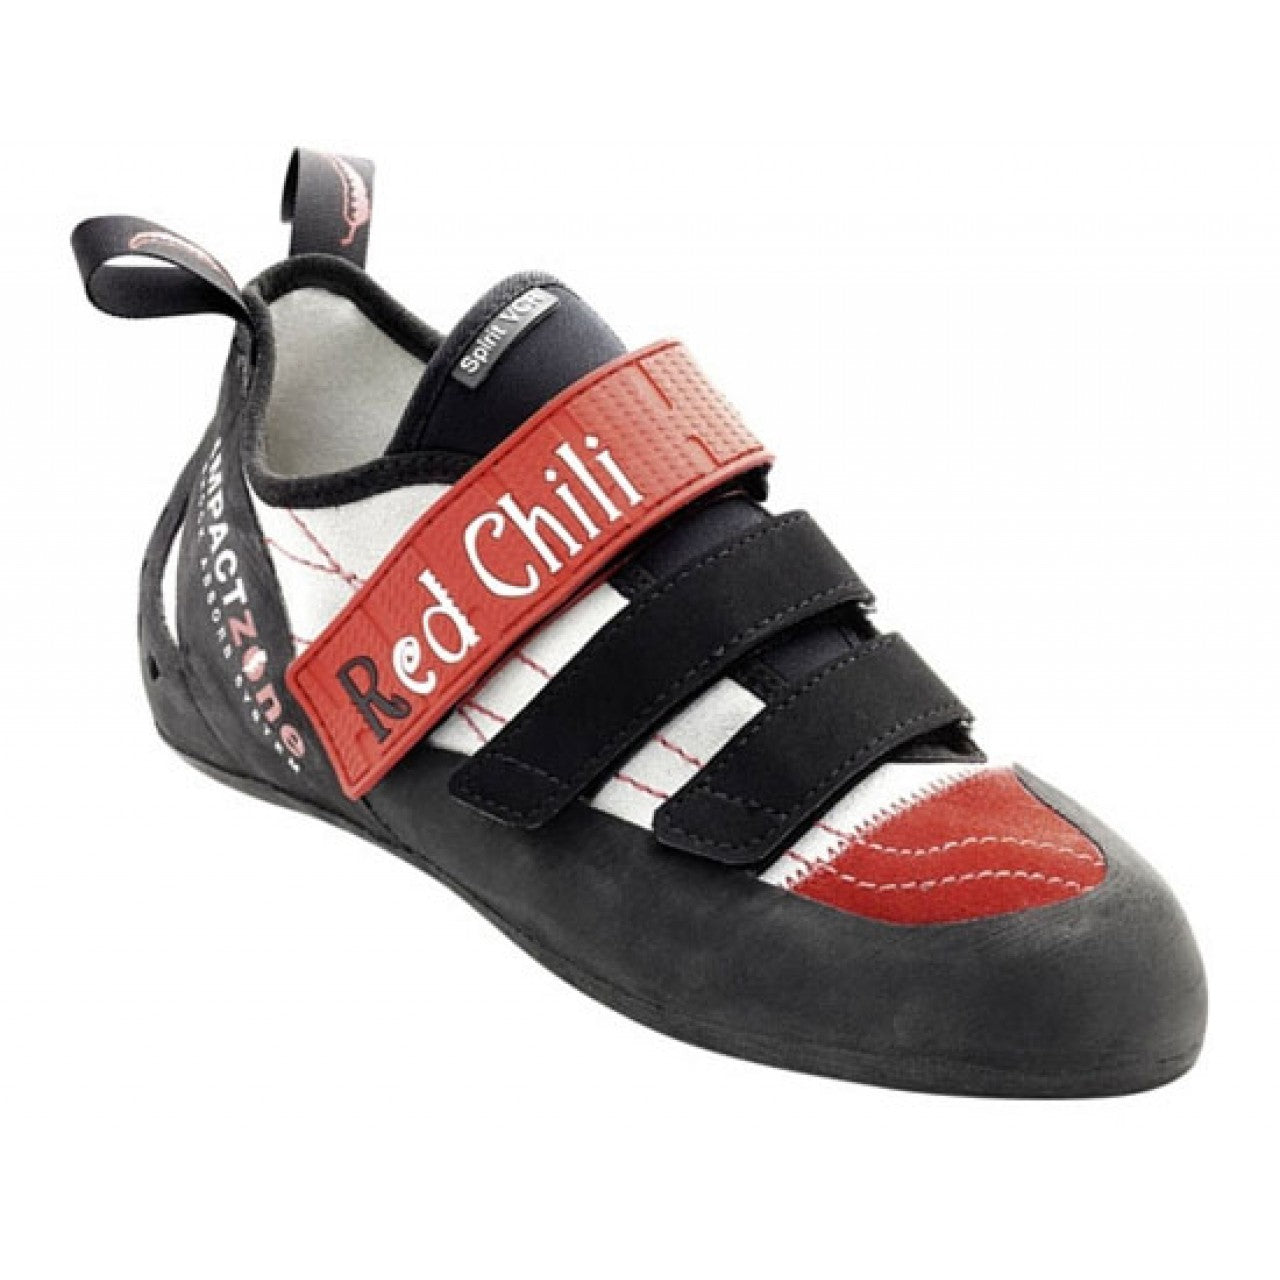 red chilli climbing shoes